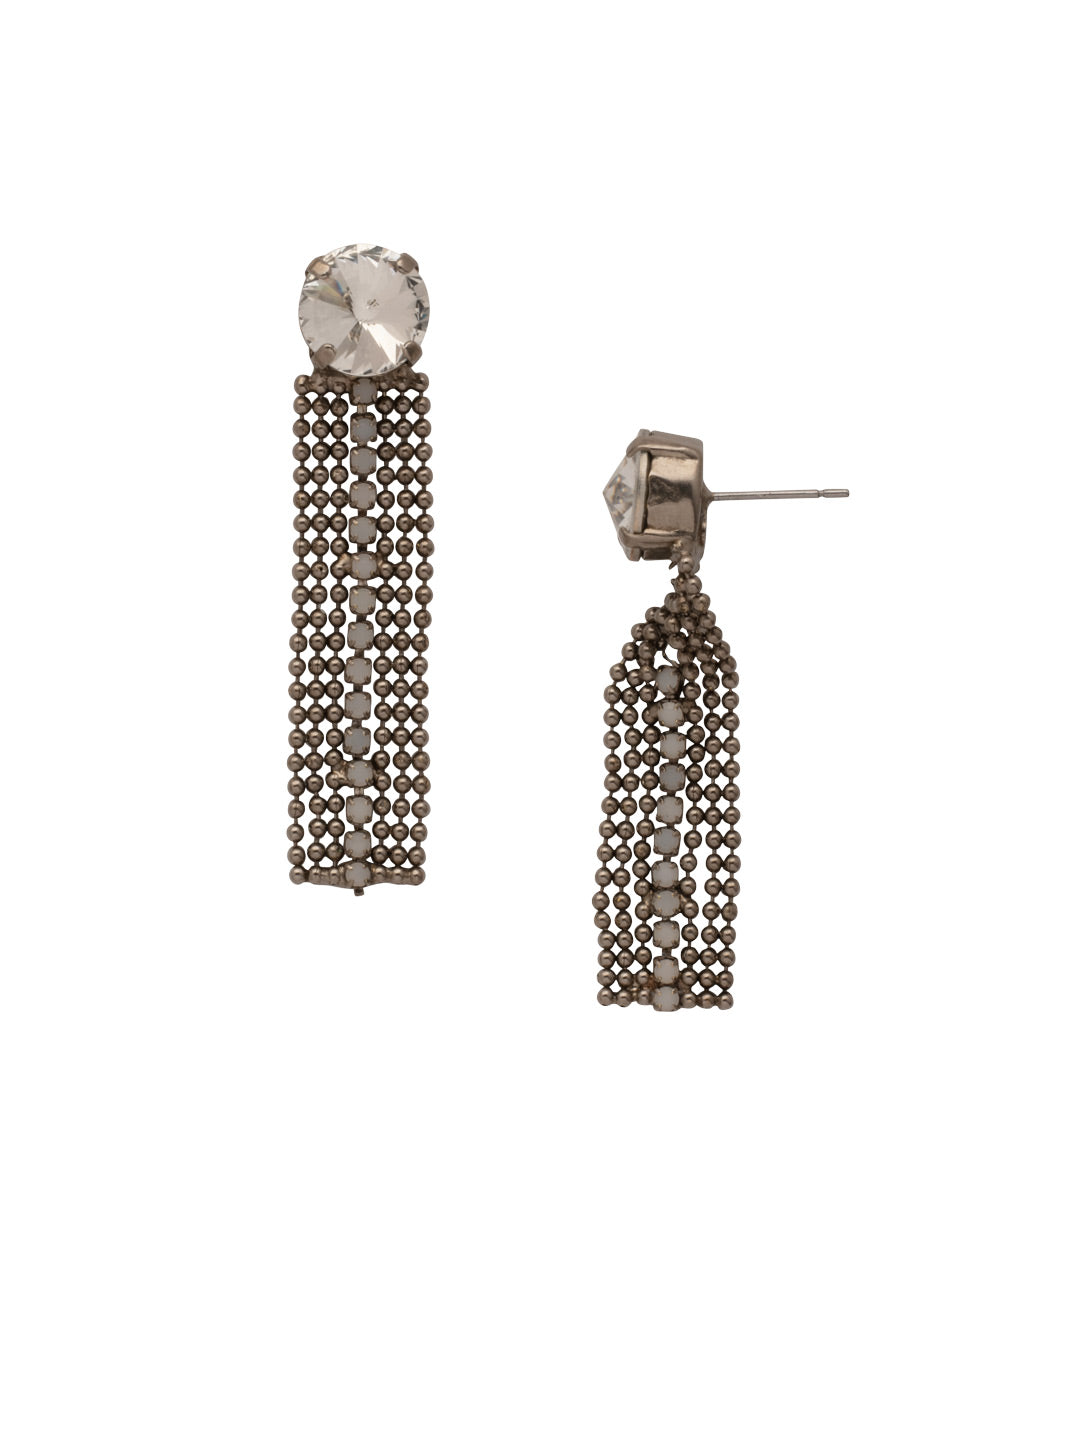 Demi Dangle Earrings - 4EFF3ASPLU - <p>The Demi Dangle Earrings are so fun and flirty! A single crystal lays base to a fringe of chain and crystal. From Sorrelli's Pearl Luster collection in our Antique Silver-tone finish.</p>